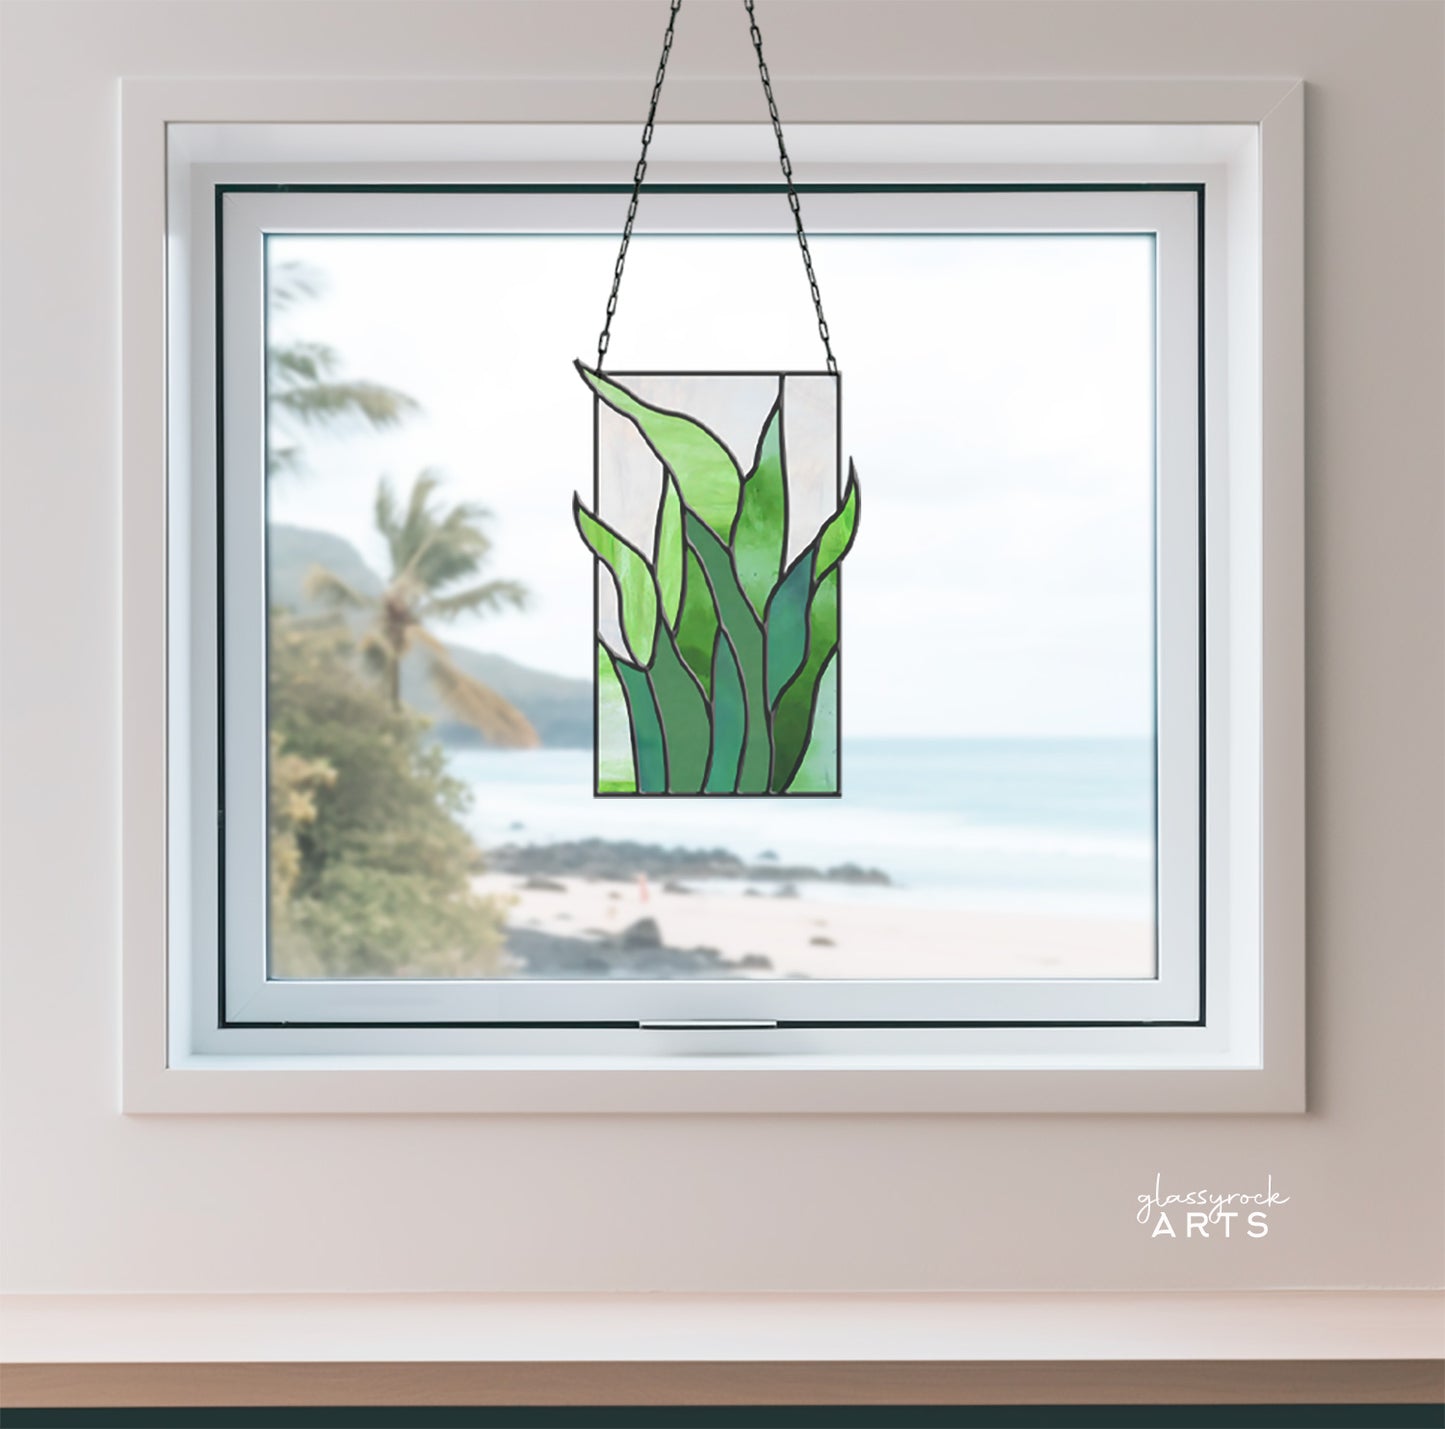 Tropical Stained Glass Plant Pattern - Kalalau